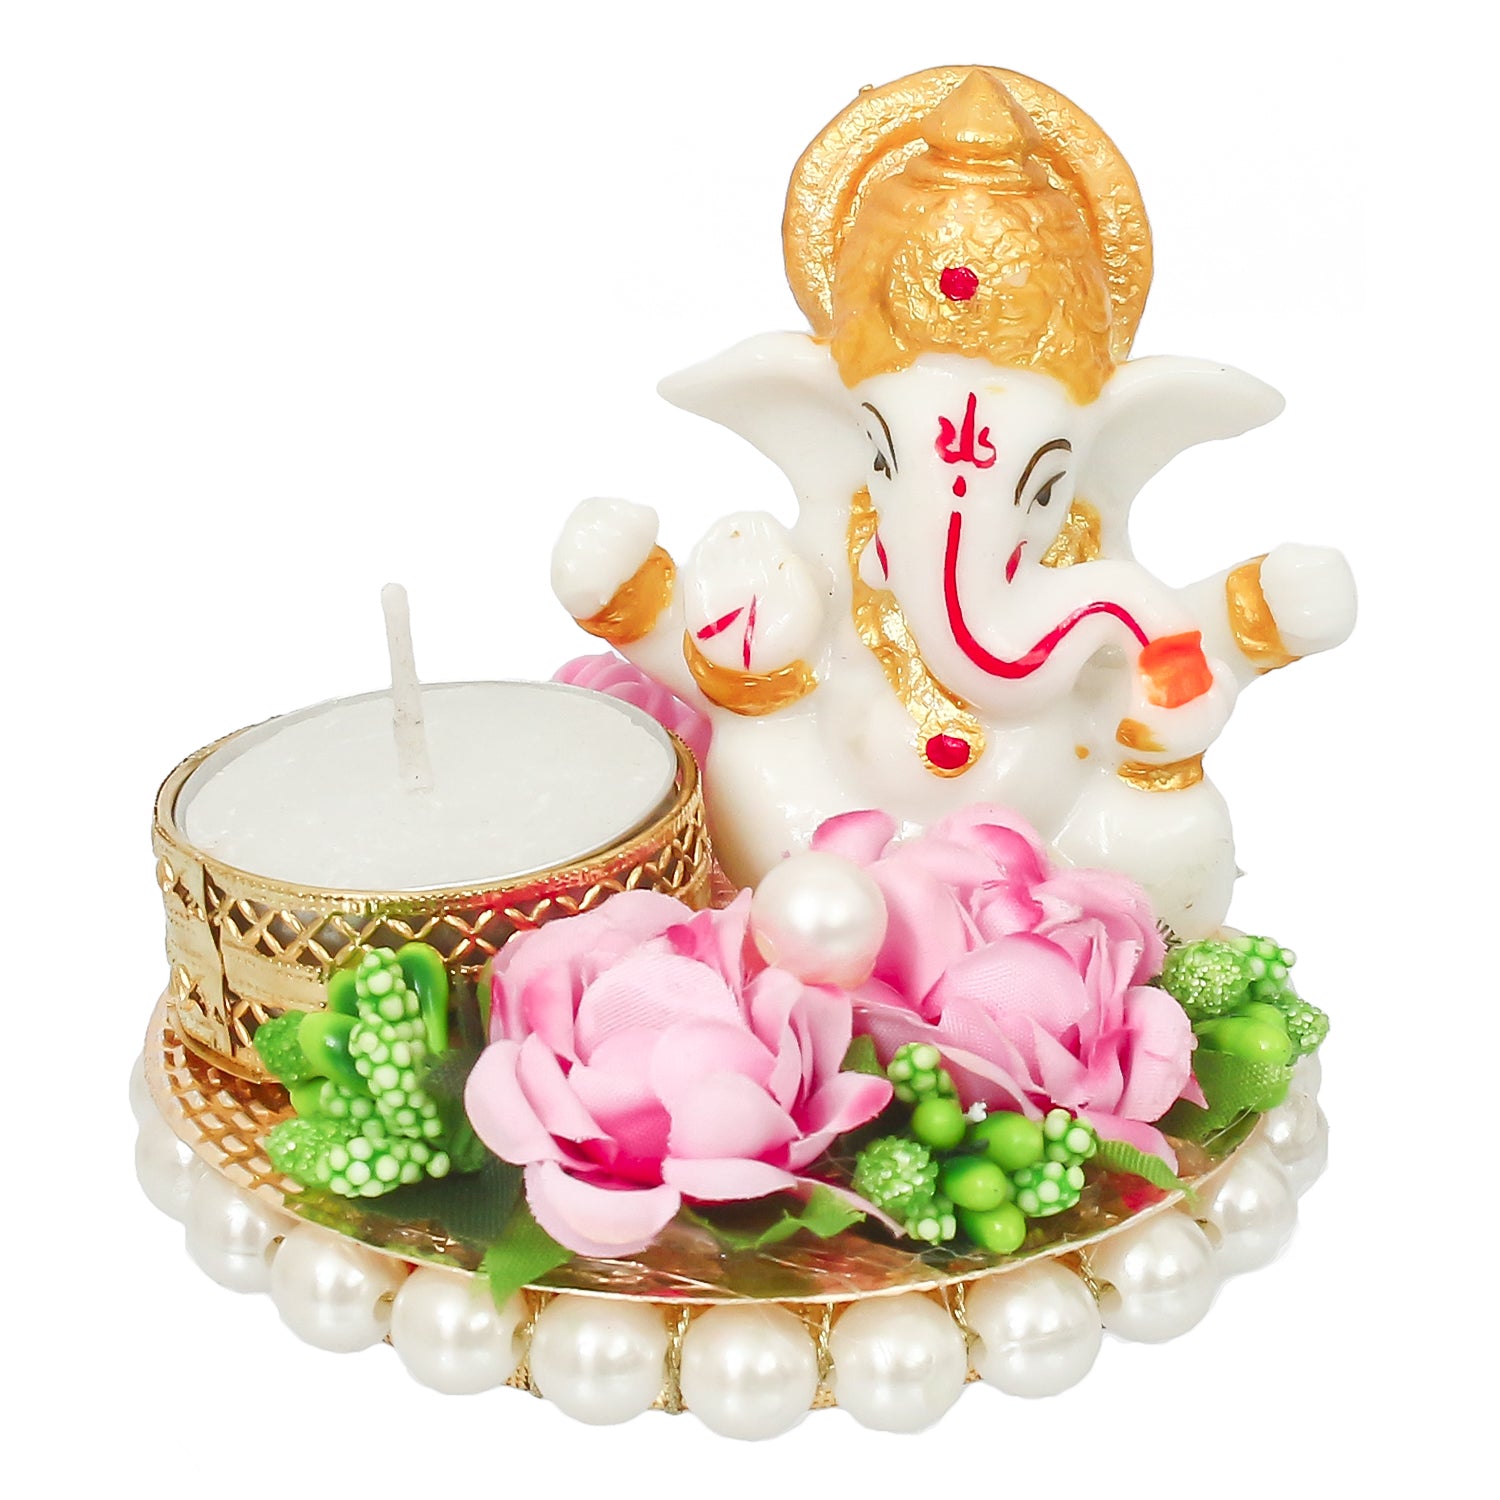 Polyresin Lord Ganesha Idol on Decorative Metal Plate with Tea Light Holder (Pink, Green and White) 3